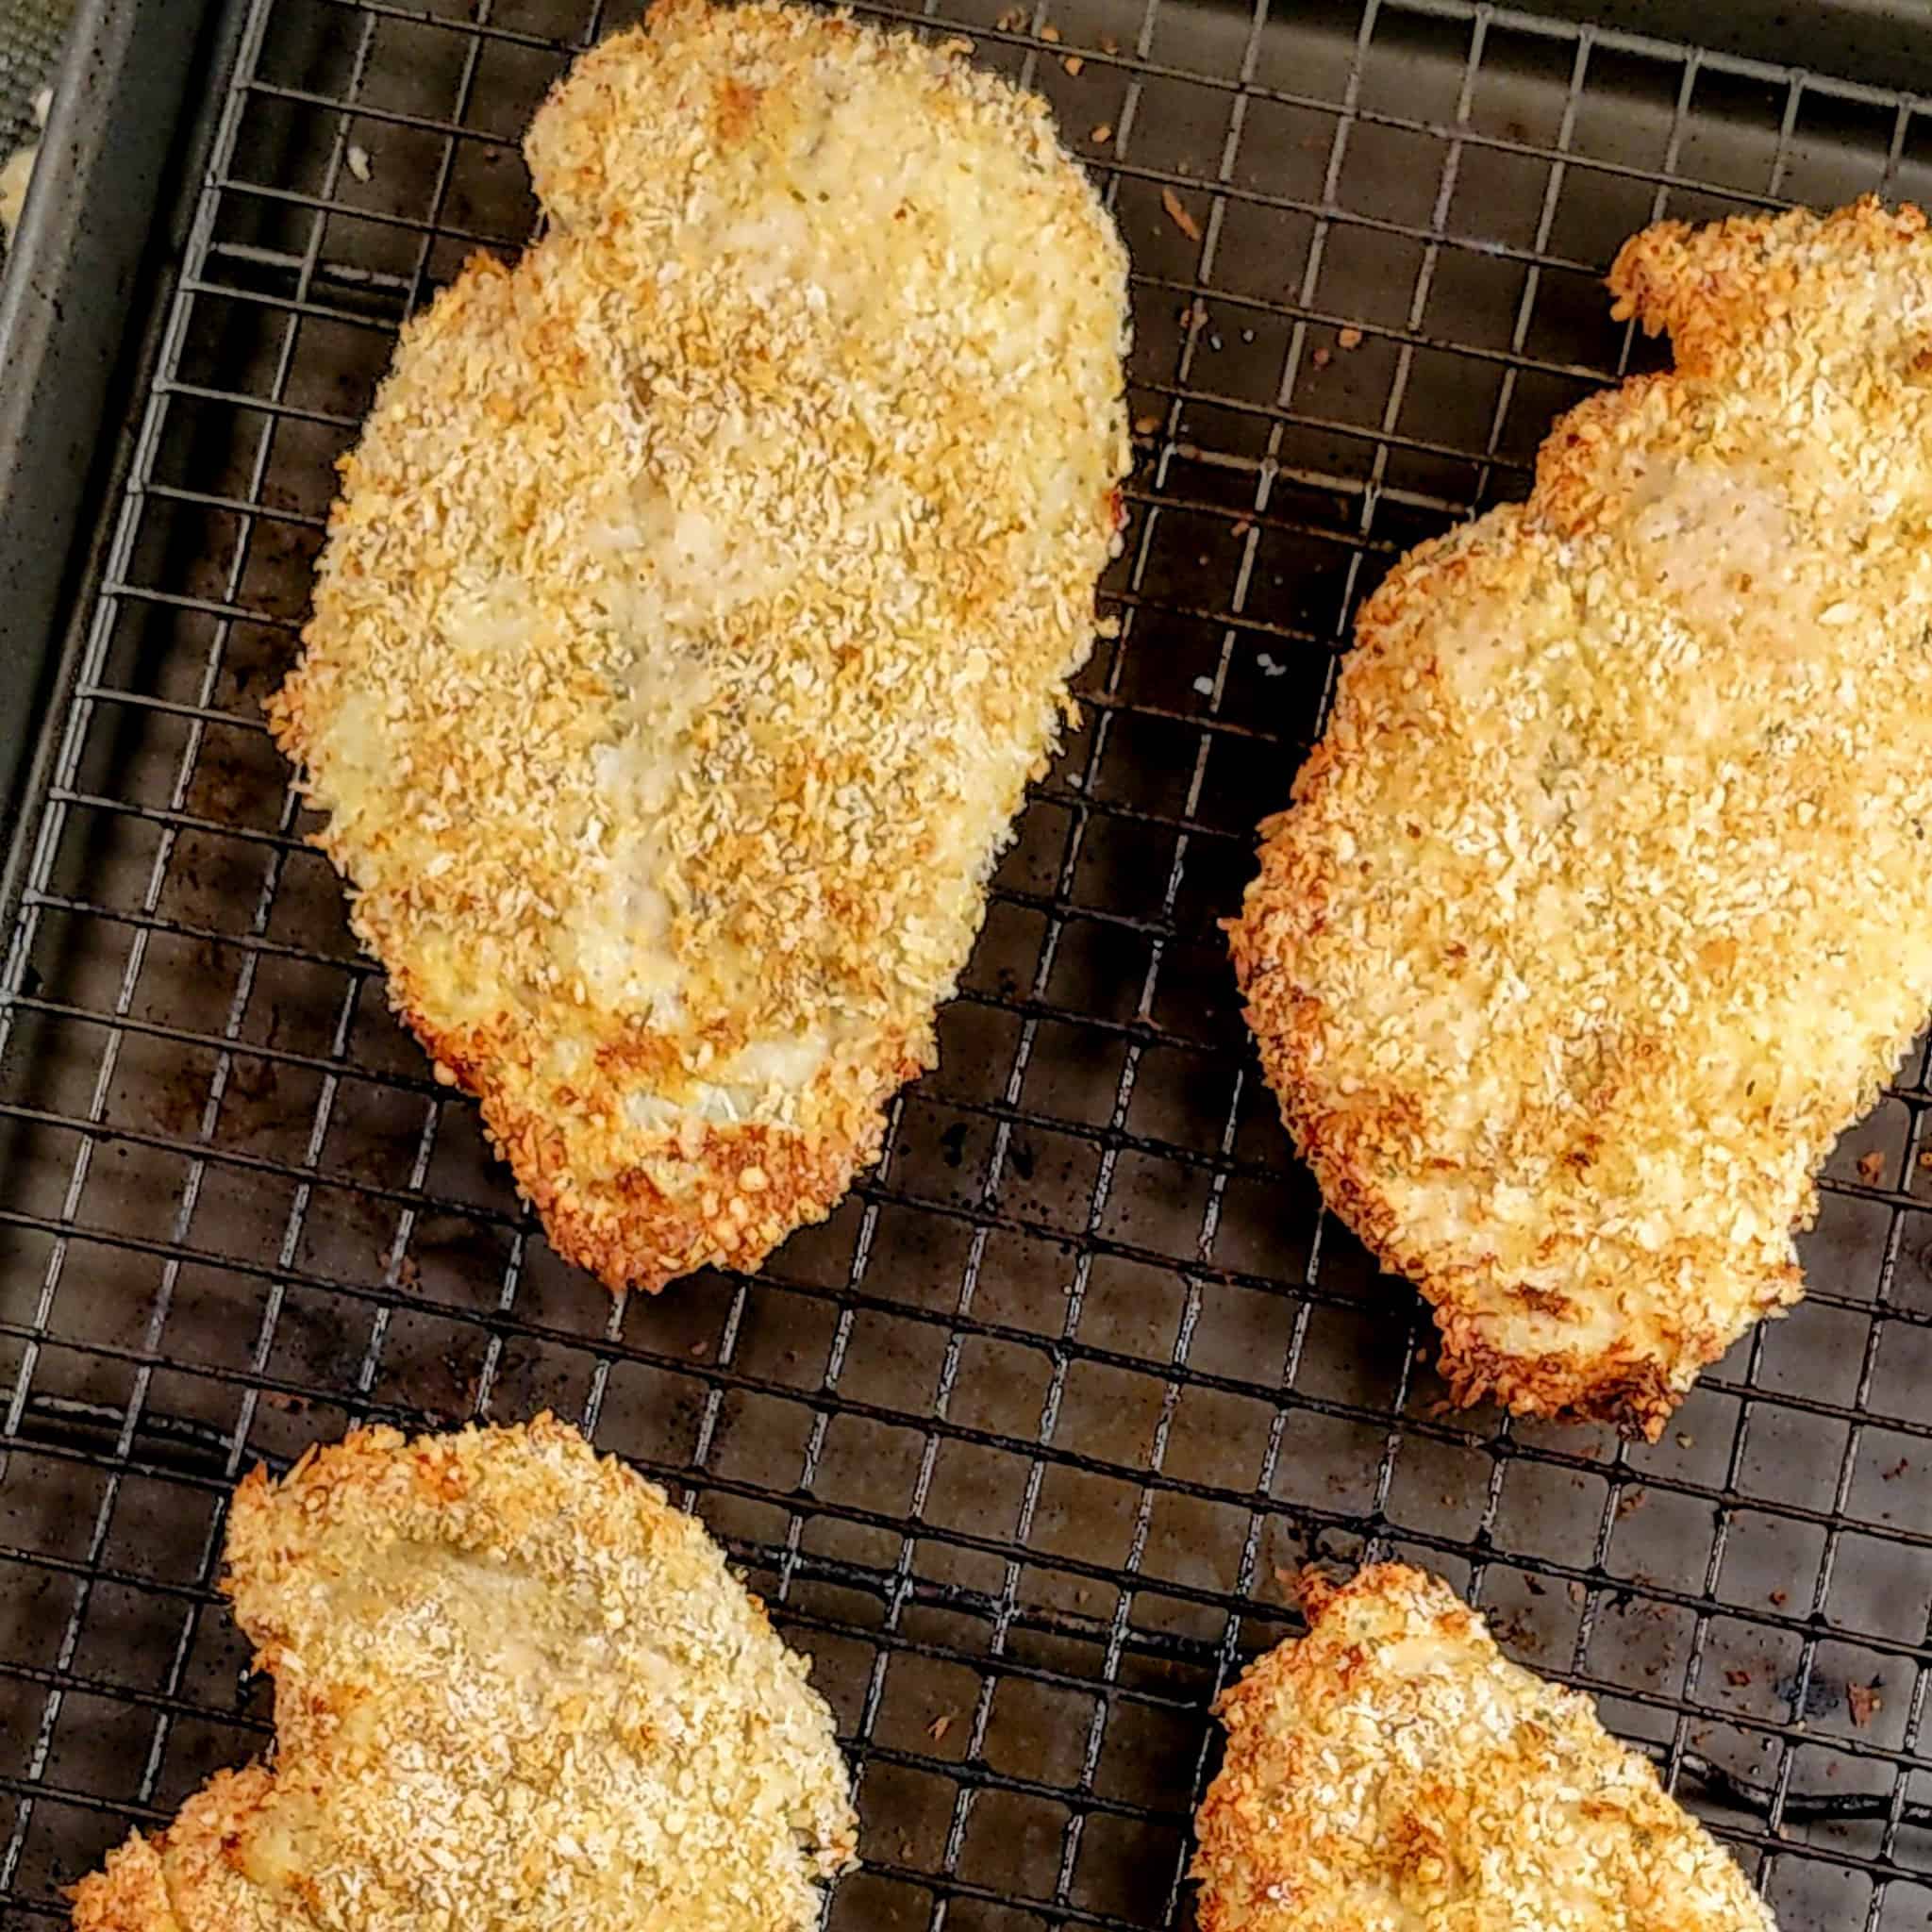 golden brown panko breaded chicken cutlets on a sheet pan with a wire rack